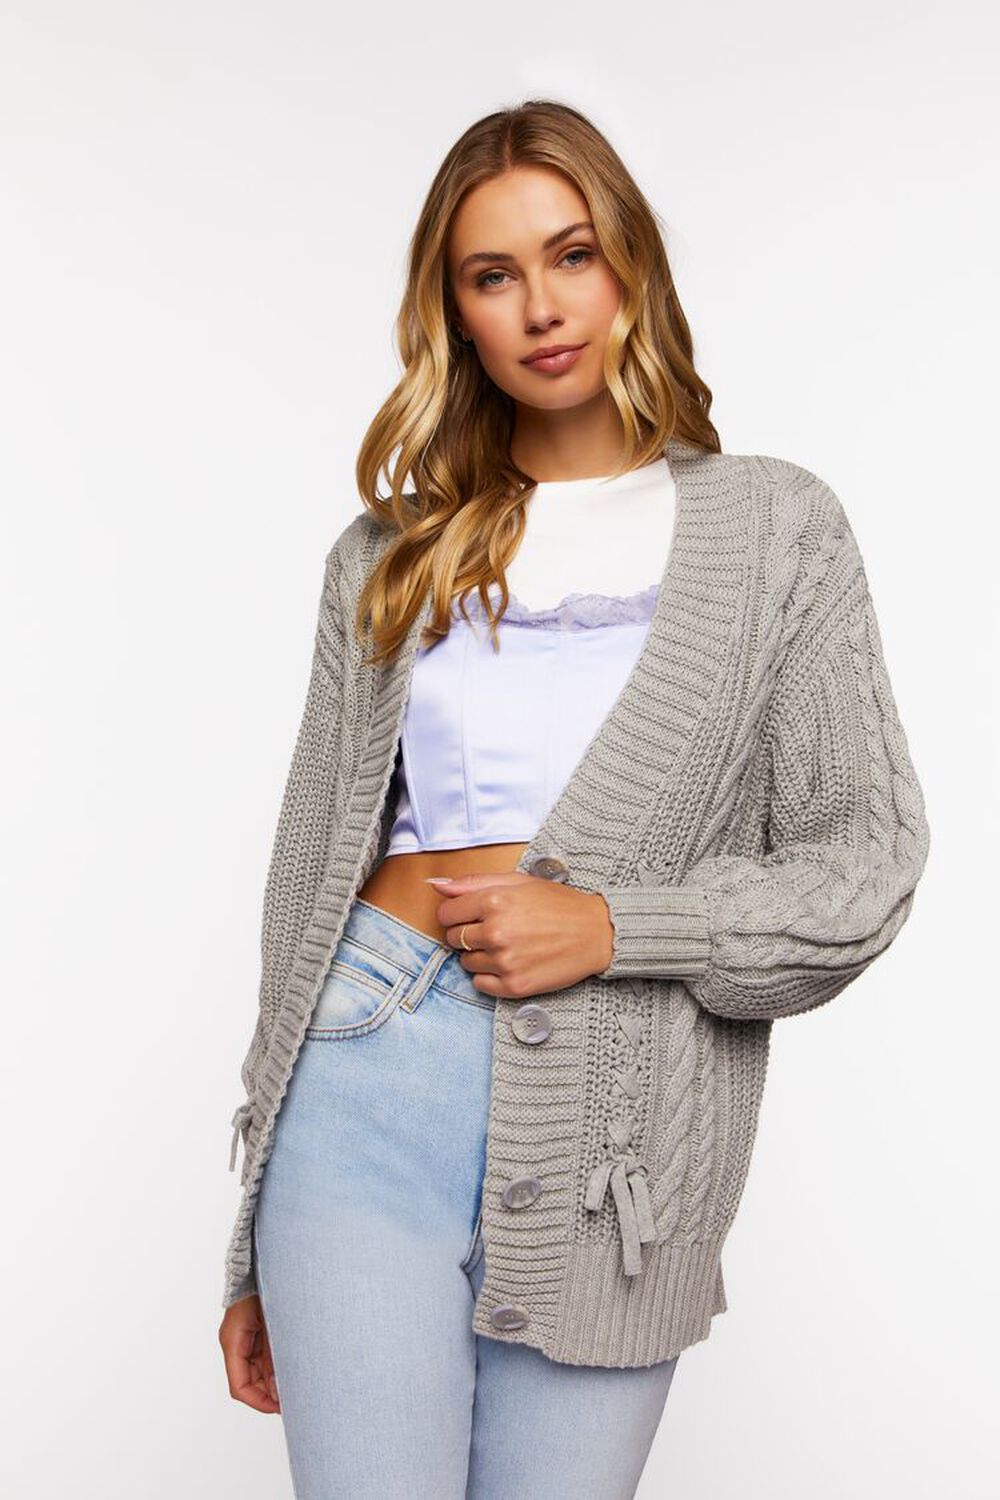 HEATHER GREY Cable Knit Cardigan Sweater, image 1